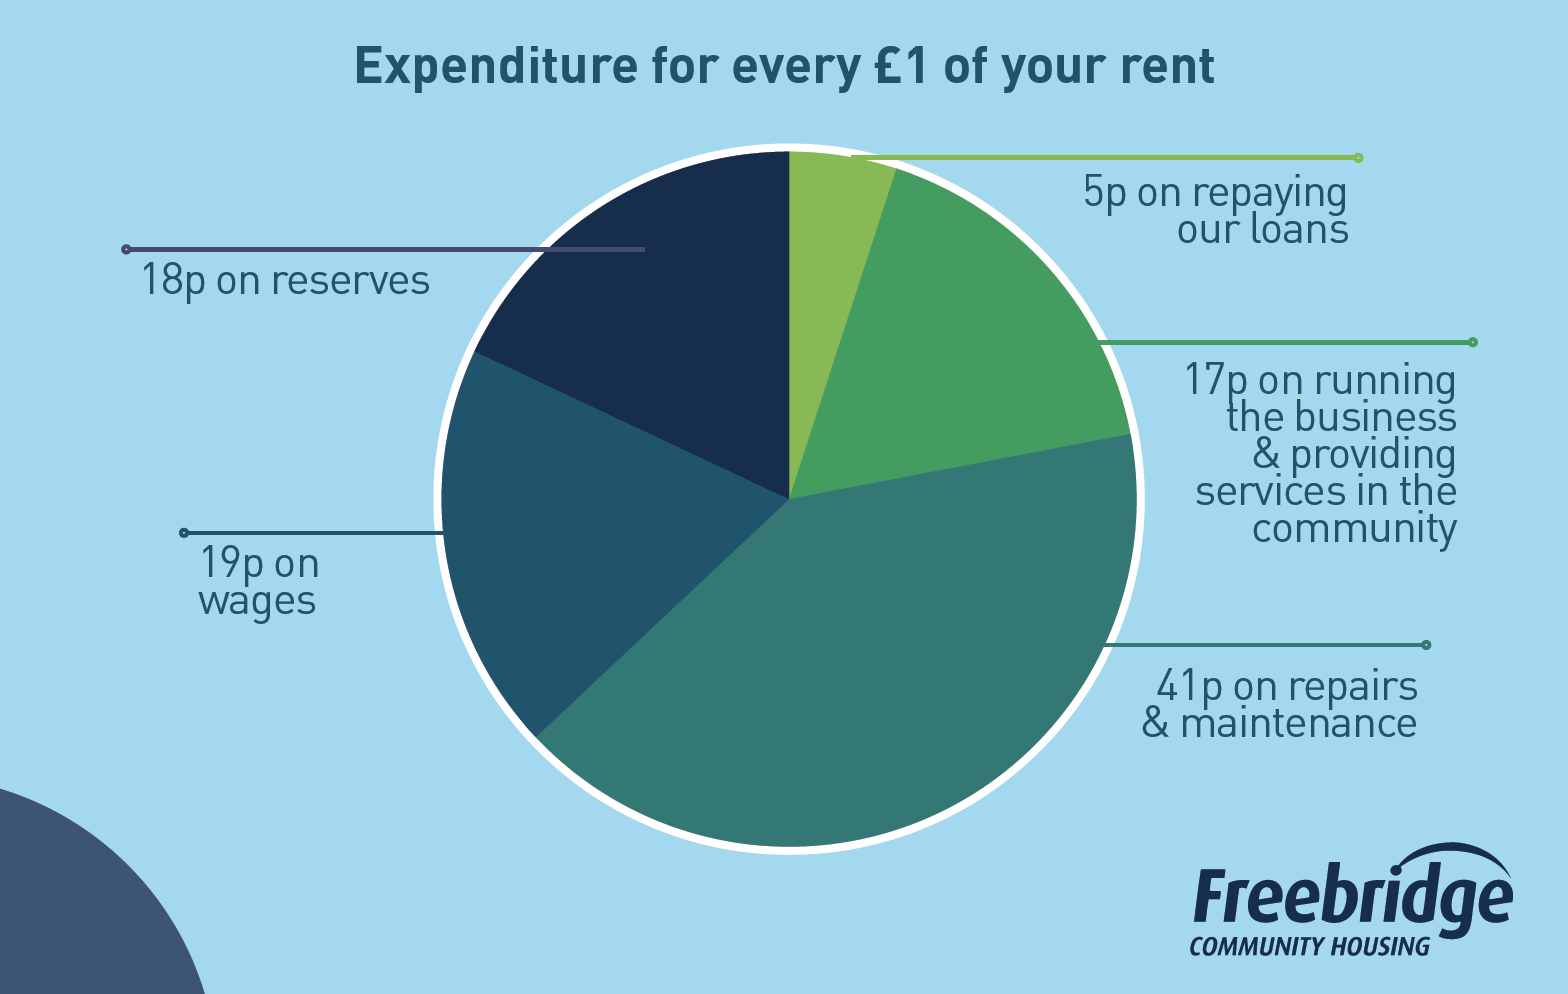 expenditure graph for every £1 of rent money spent